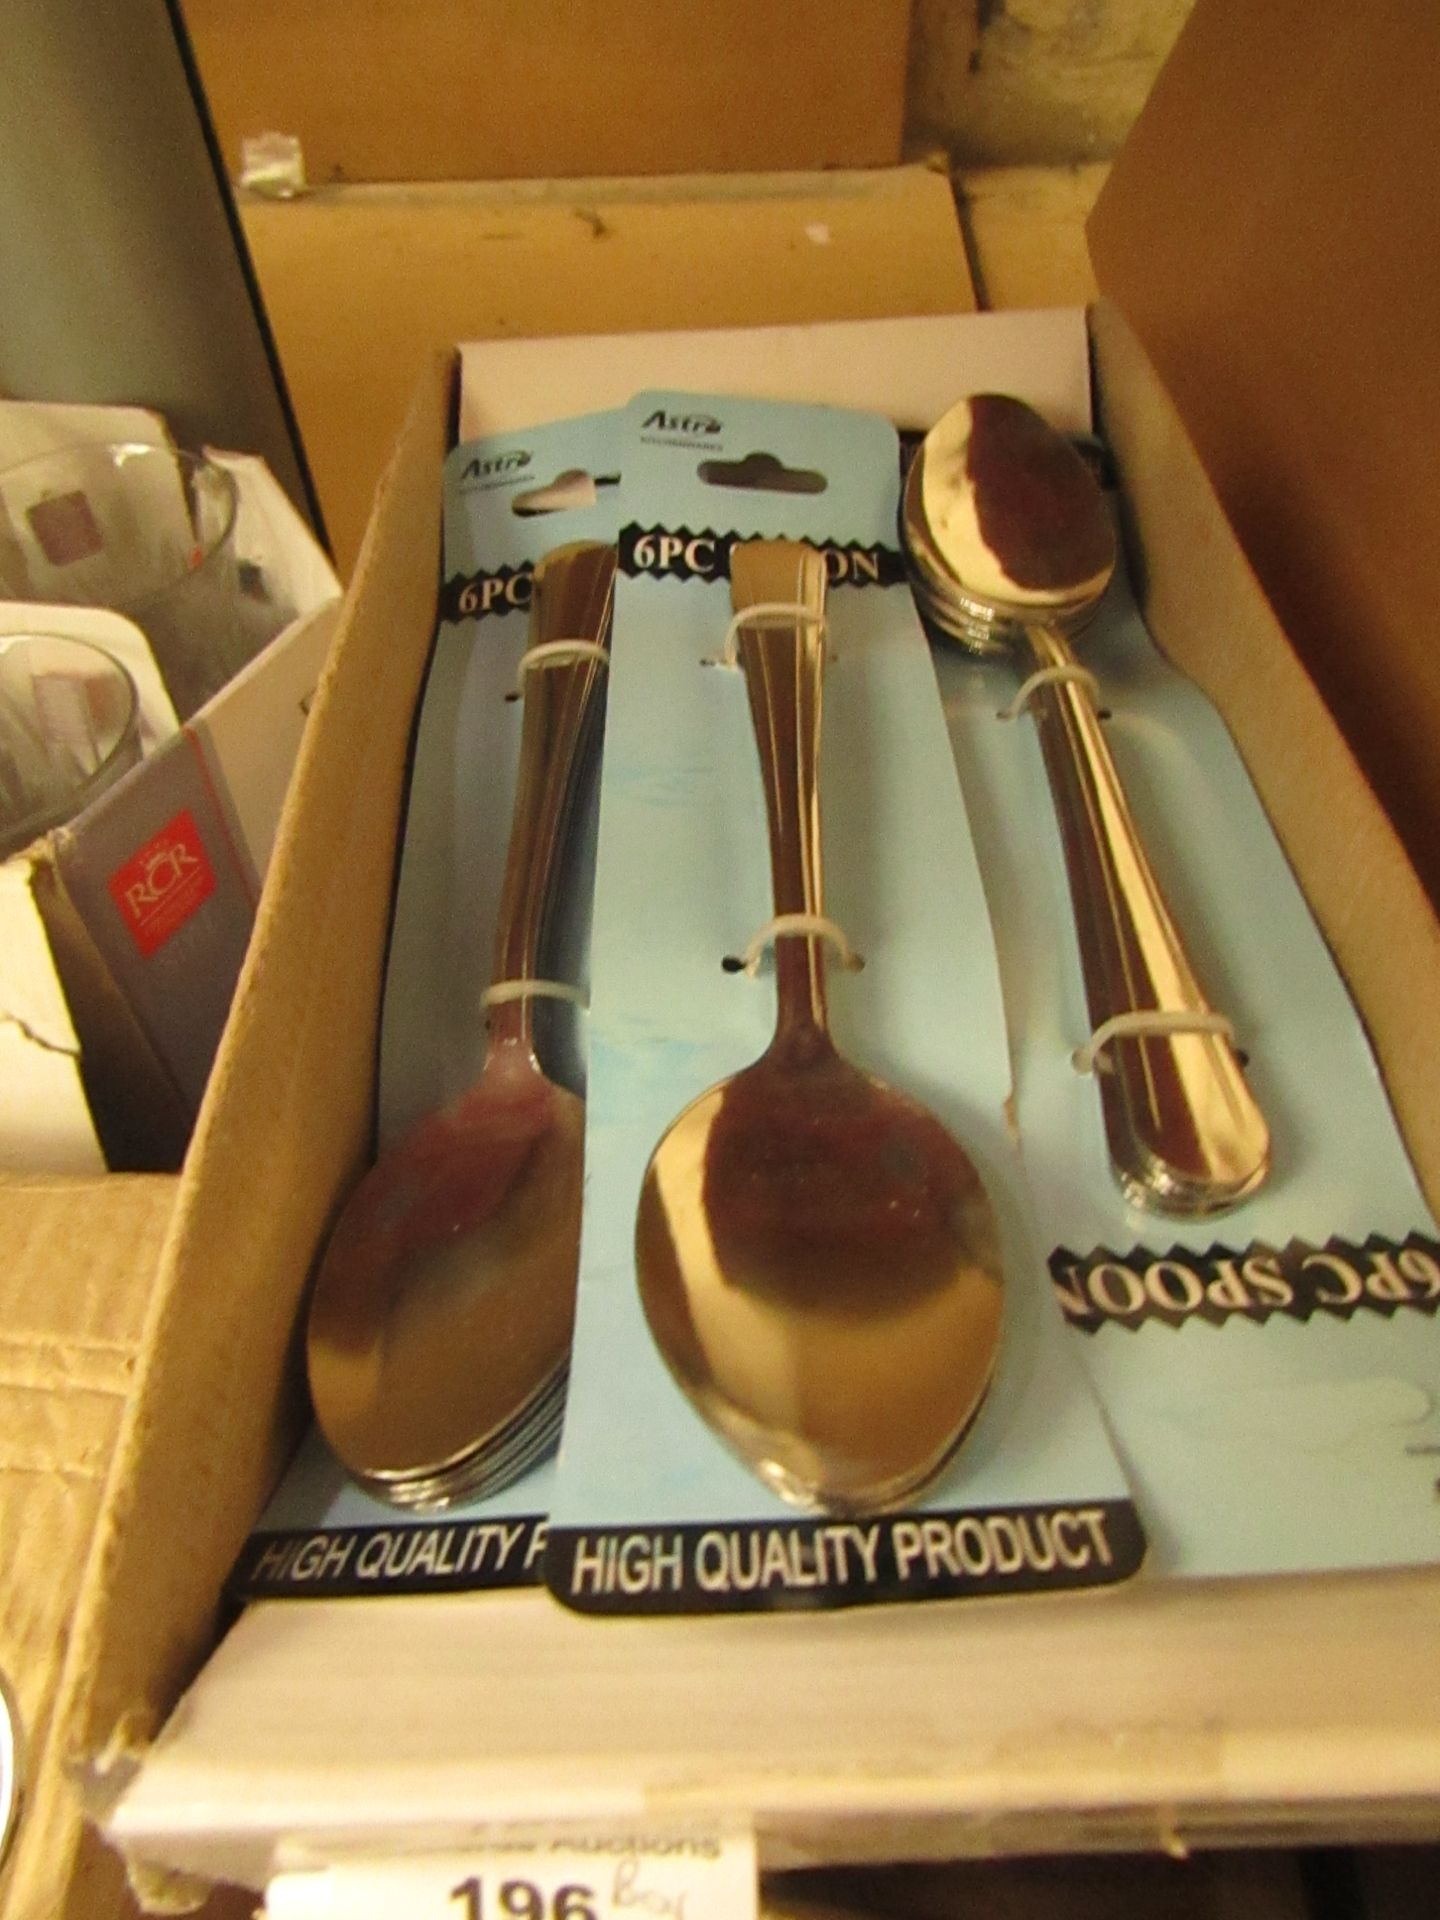 Box of 12 packs 6 table spoons. Brand new with tags